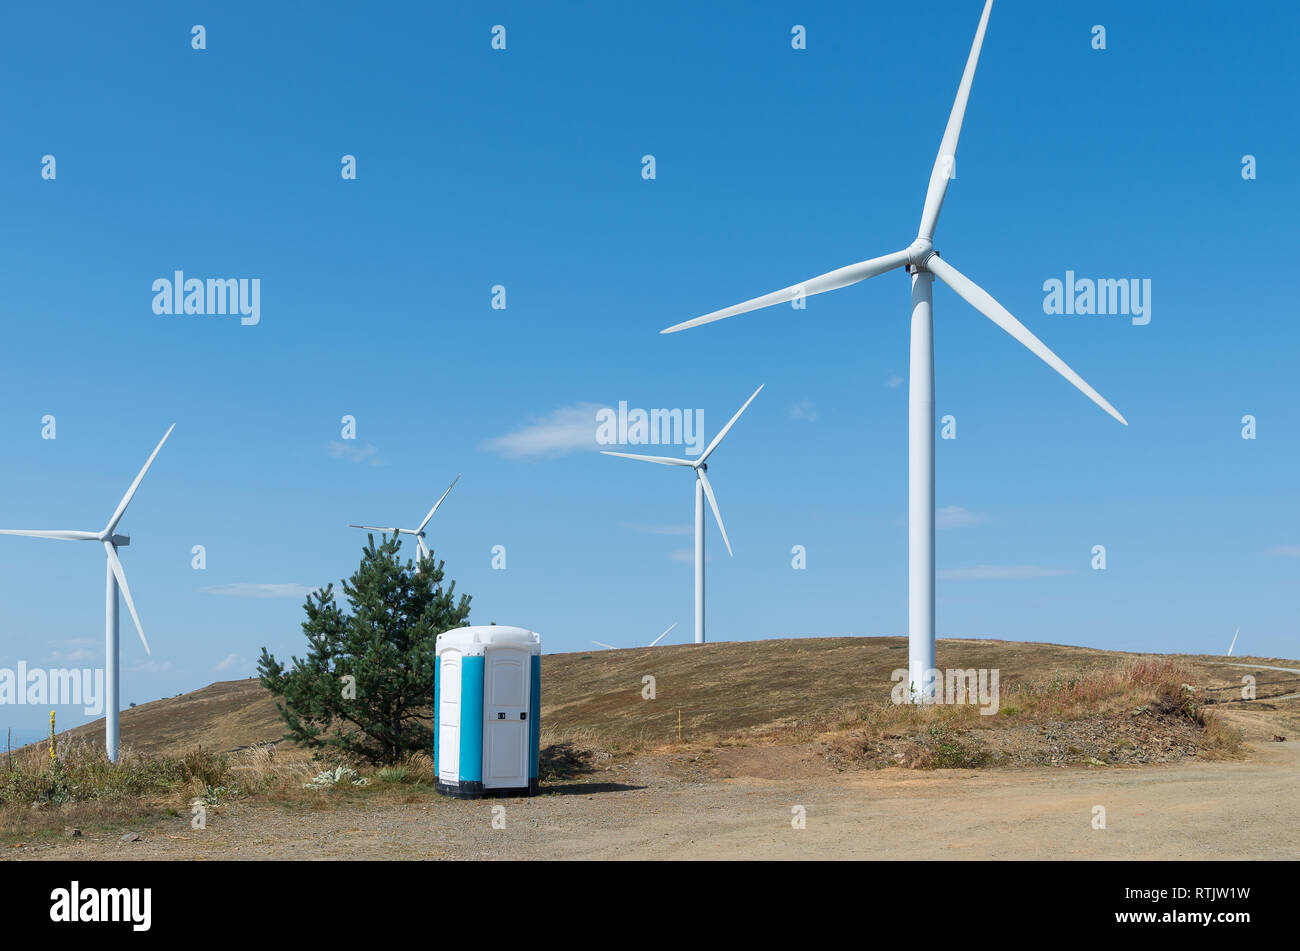 Wind Power. Electricity by wind power. Plastic toilet mobile. Stock Photo